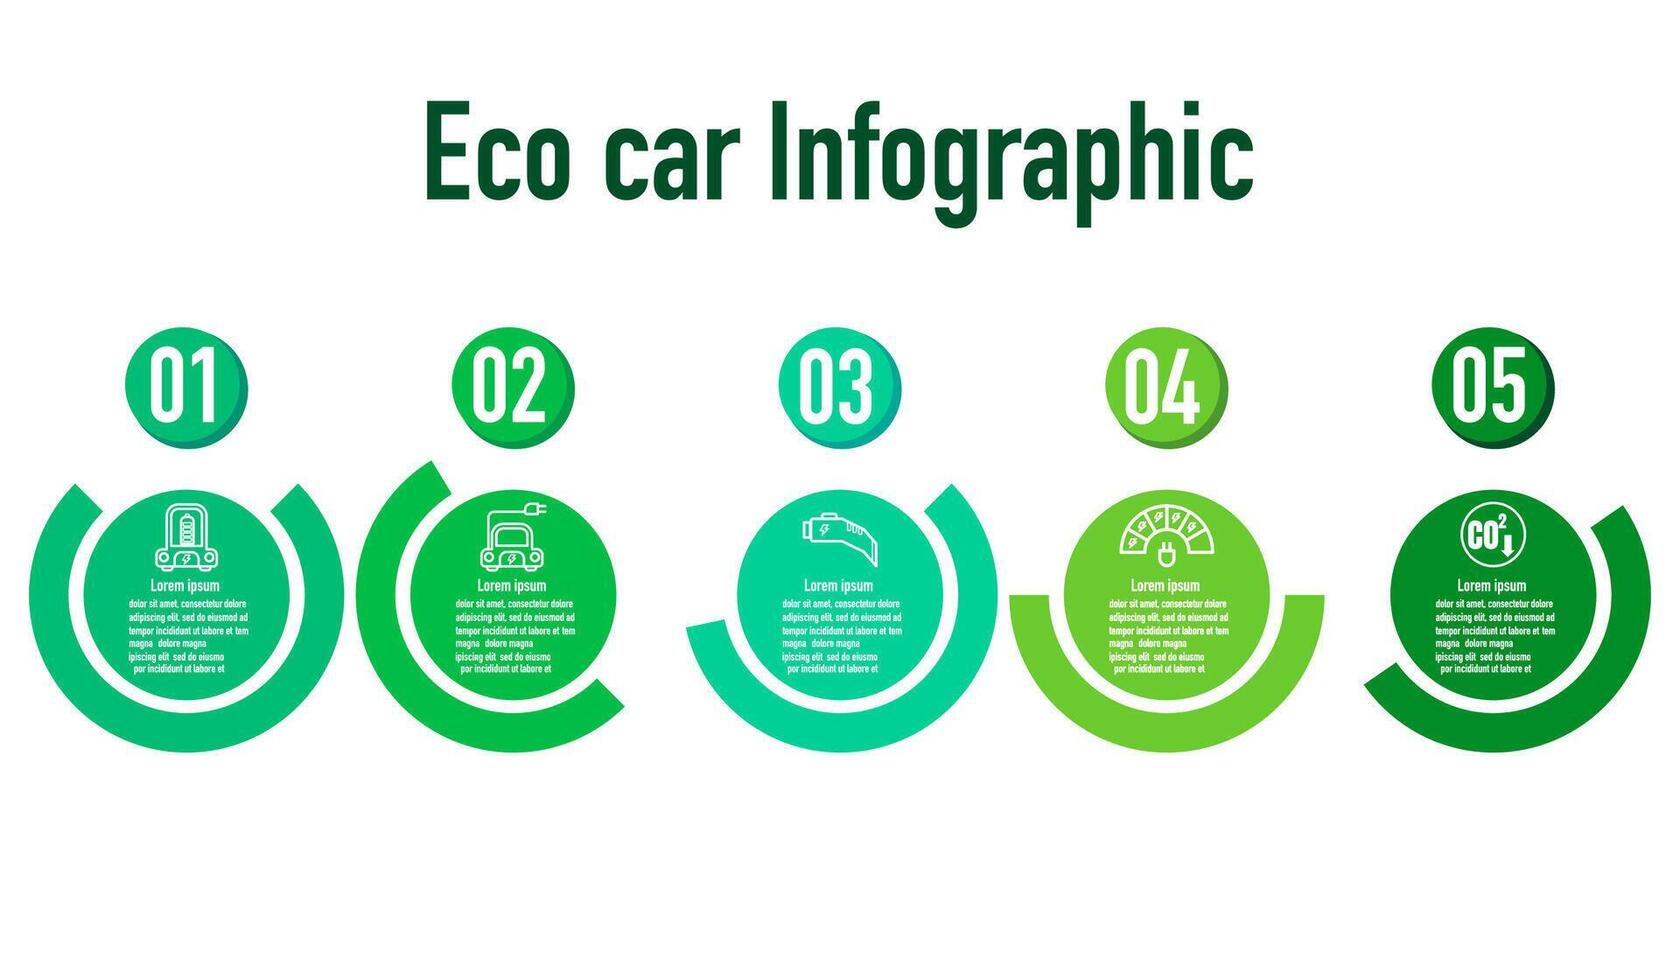 Infographic eco car template for energy consumption sustainable information presentation. Vector square and icon elements. ecology modern workflow diagrams. Report plan 5 topics